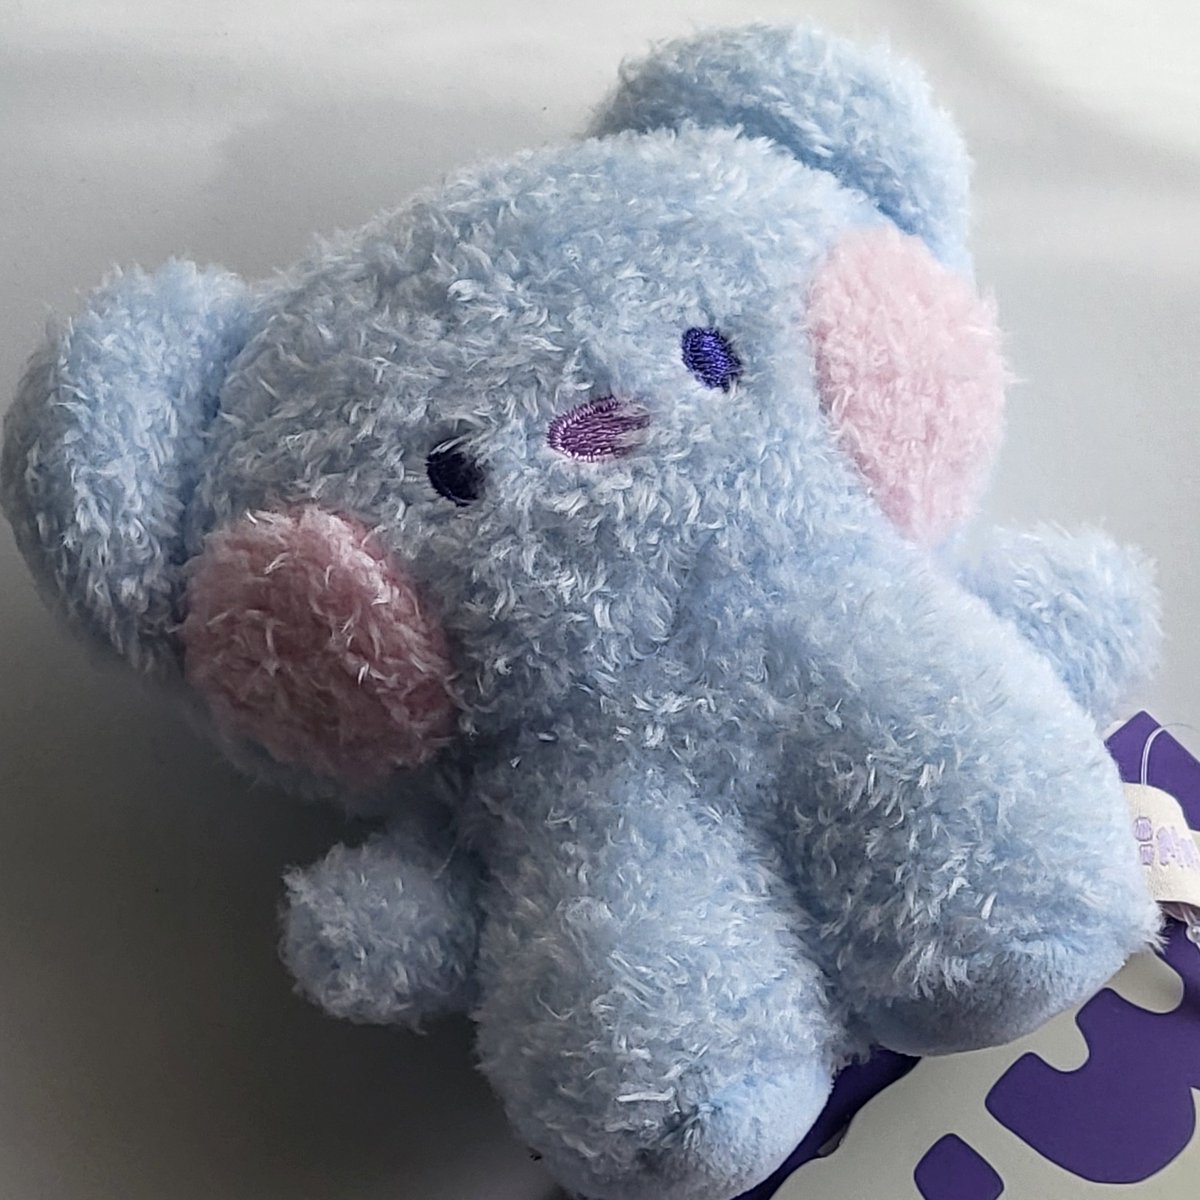 guys look what came in the mail!
a tiny koya